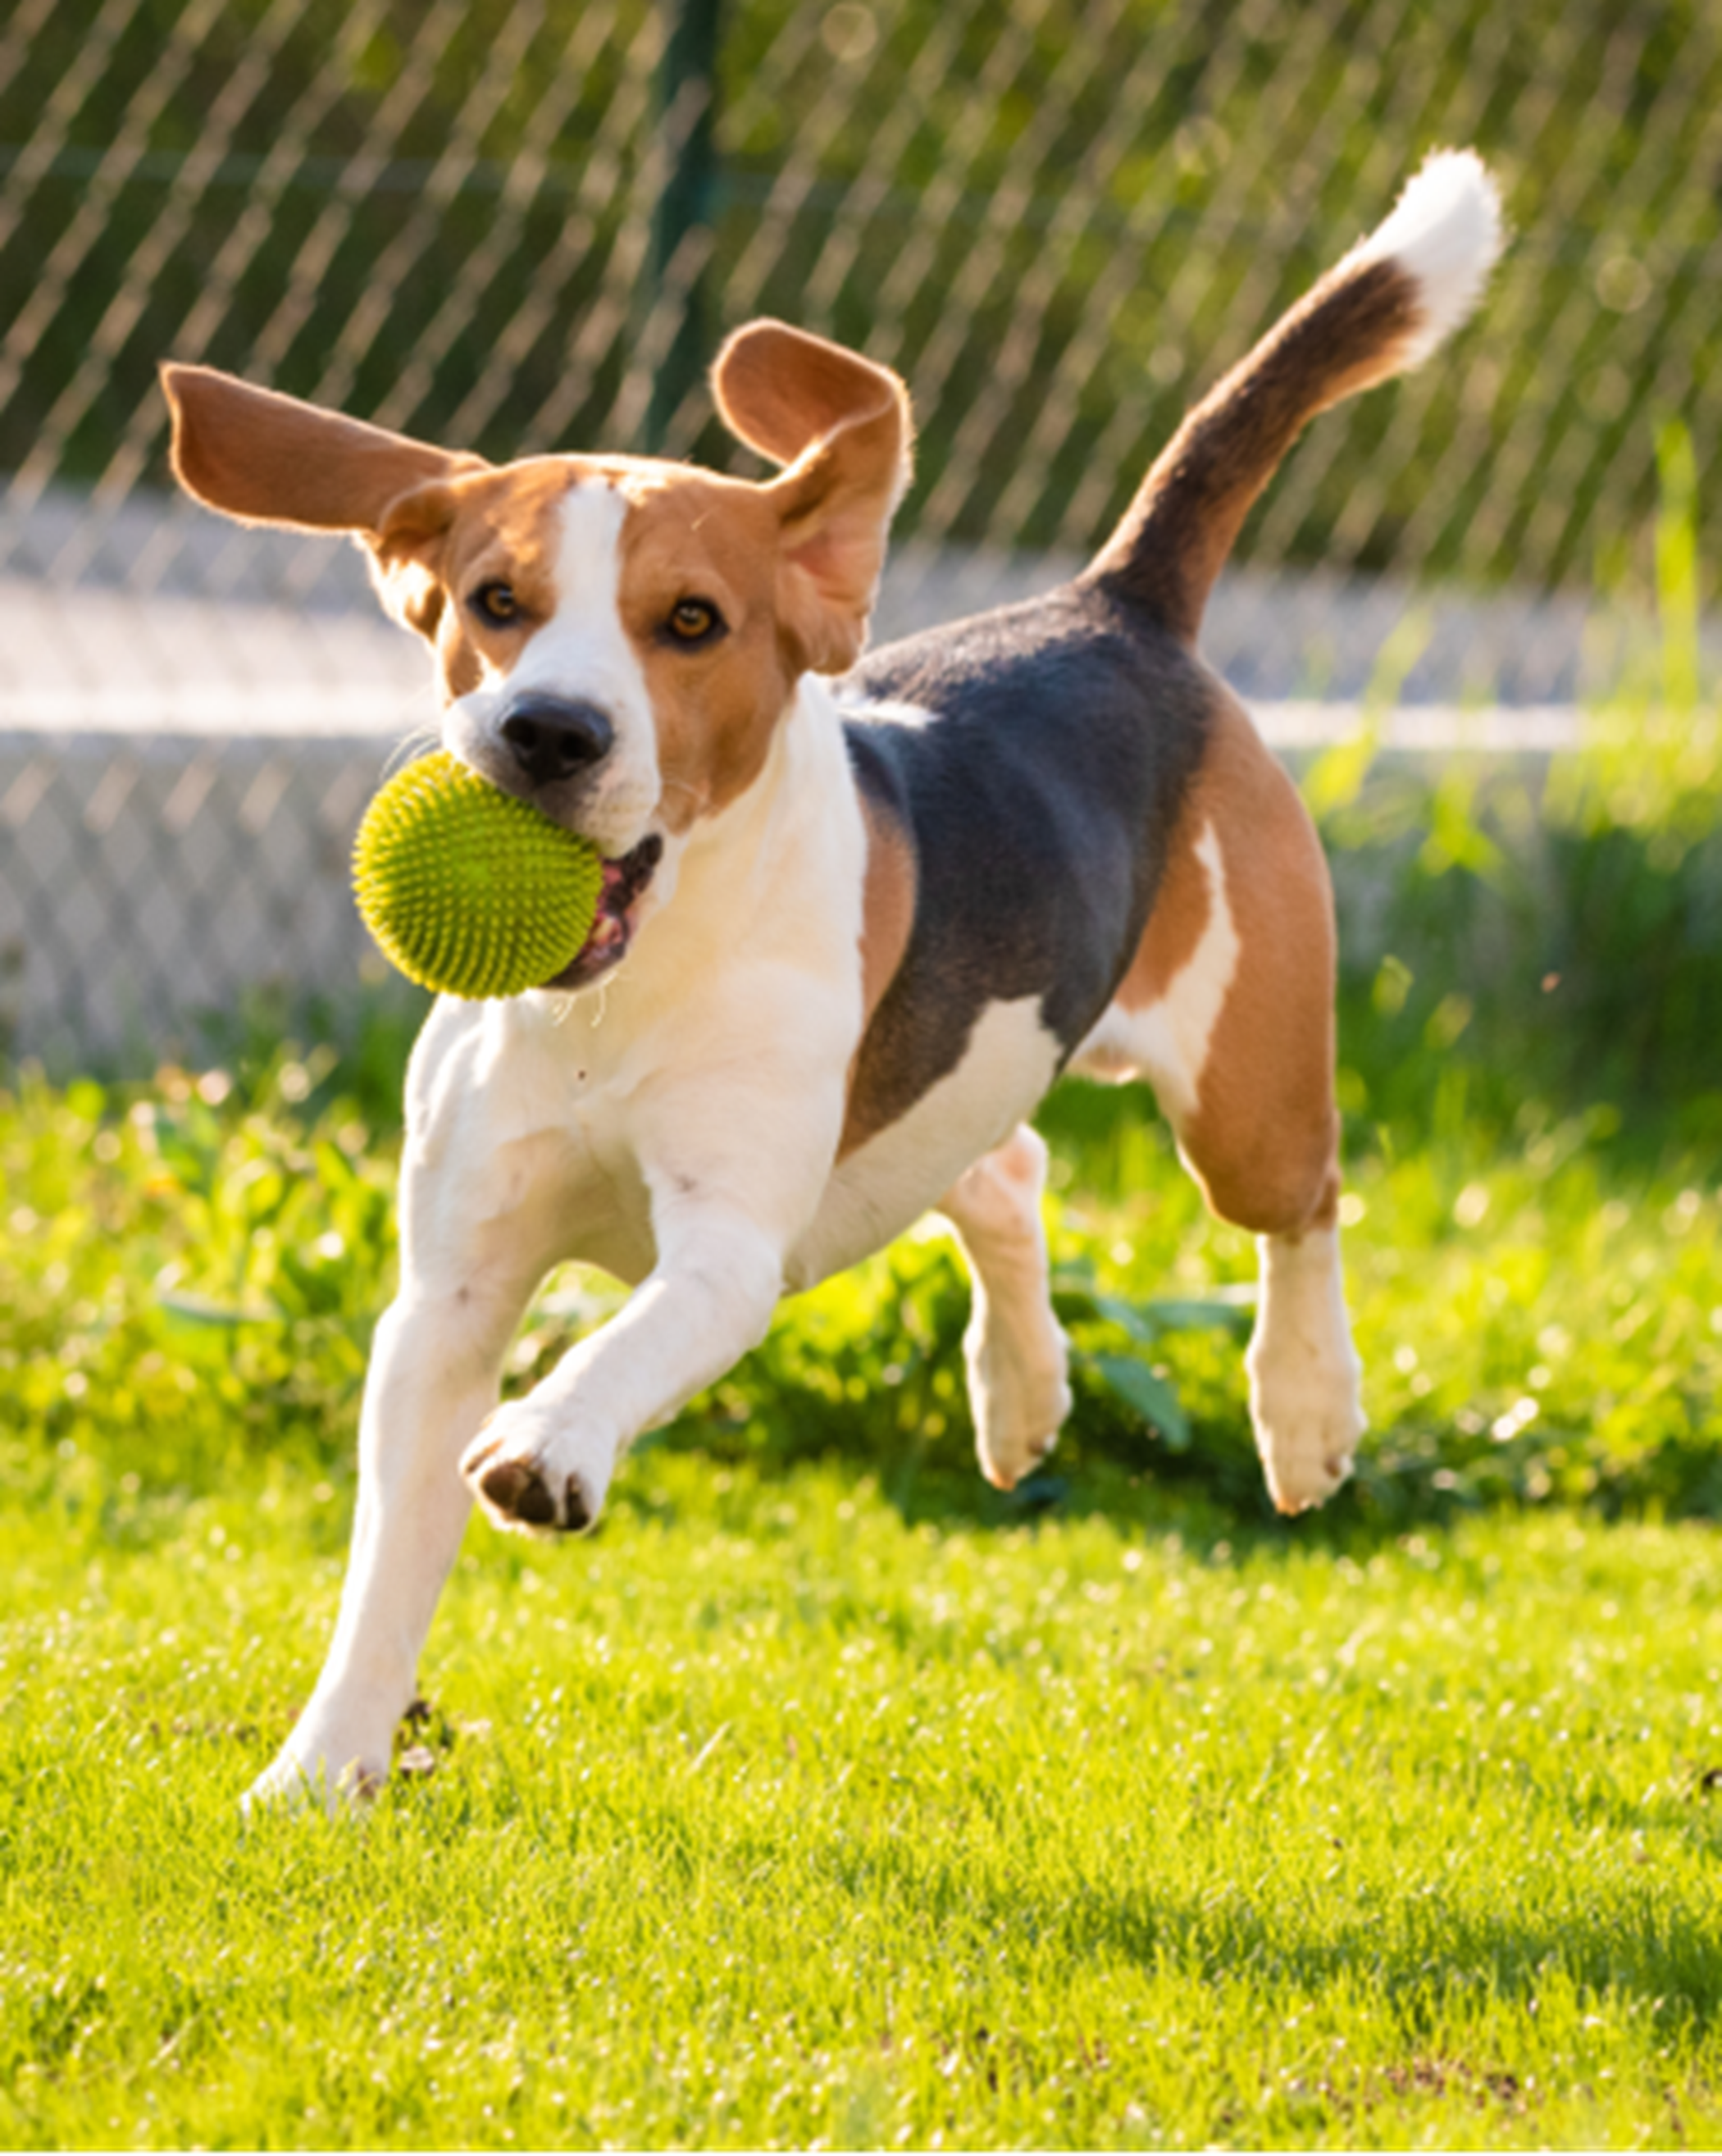 Dog running with a tennis ball on a grass lawn